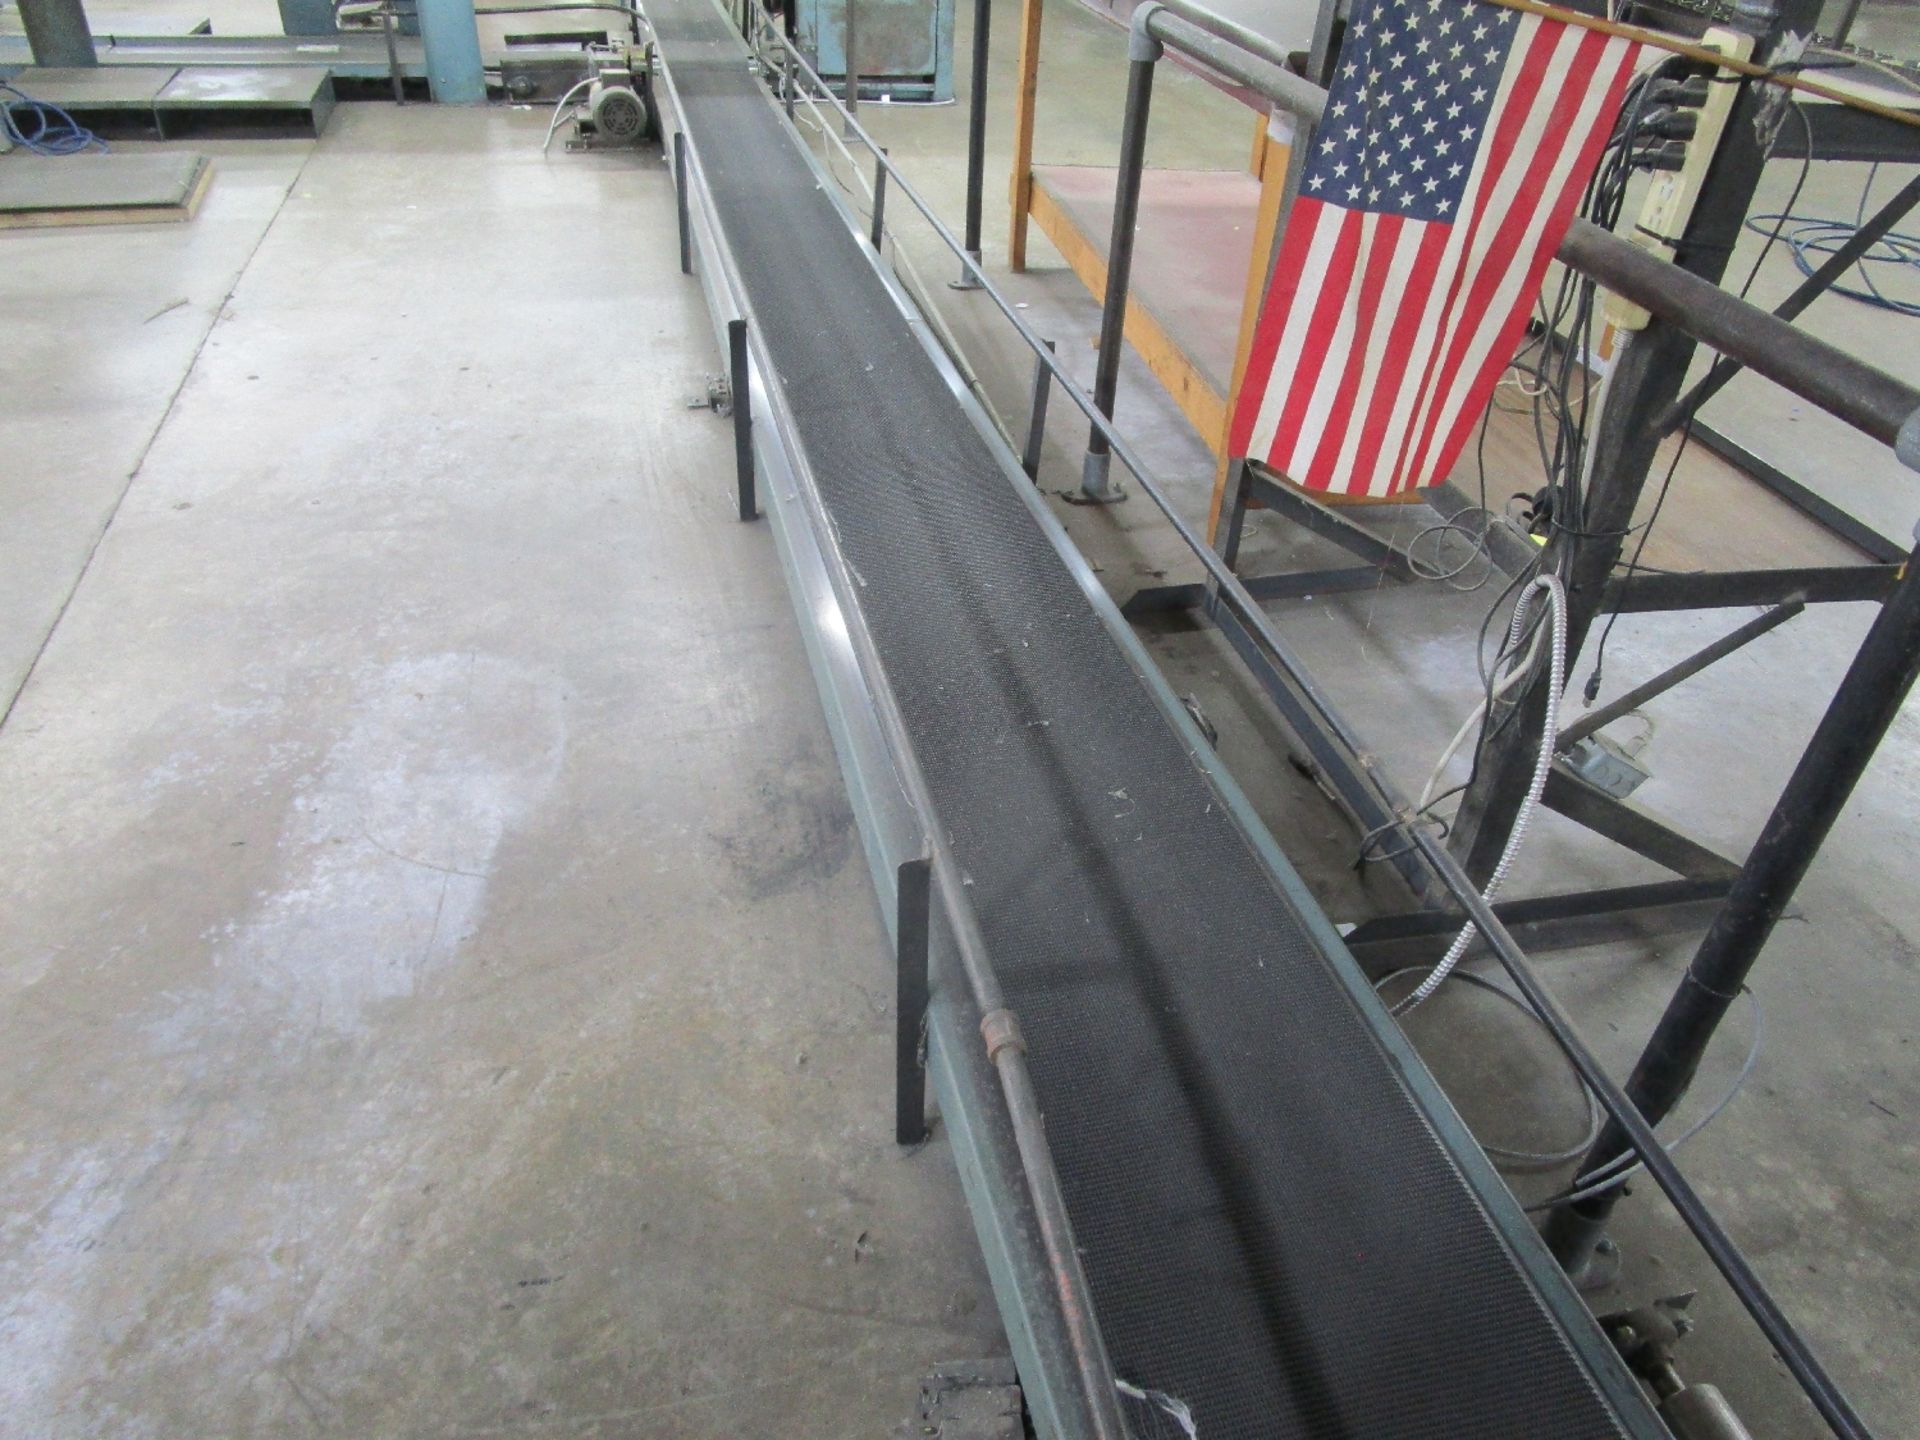 Hytrol Powered Conveyor System Throughout Sewing Department - Image 2 of 7